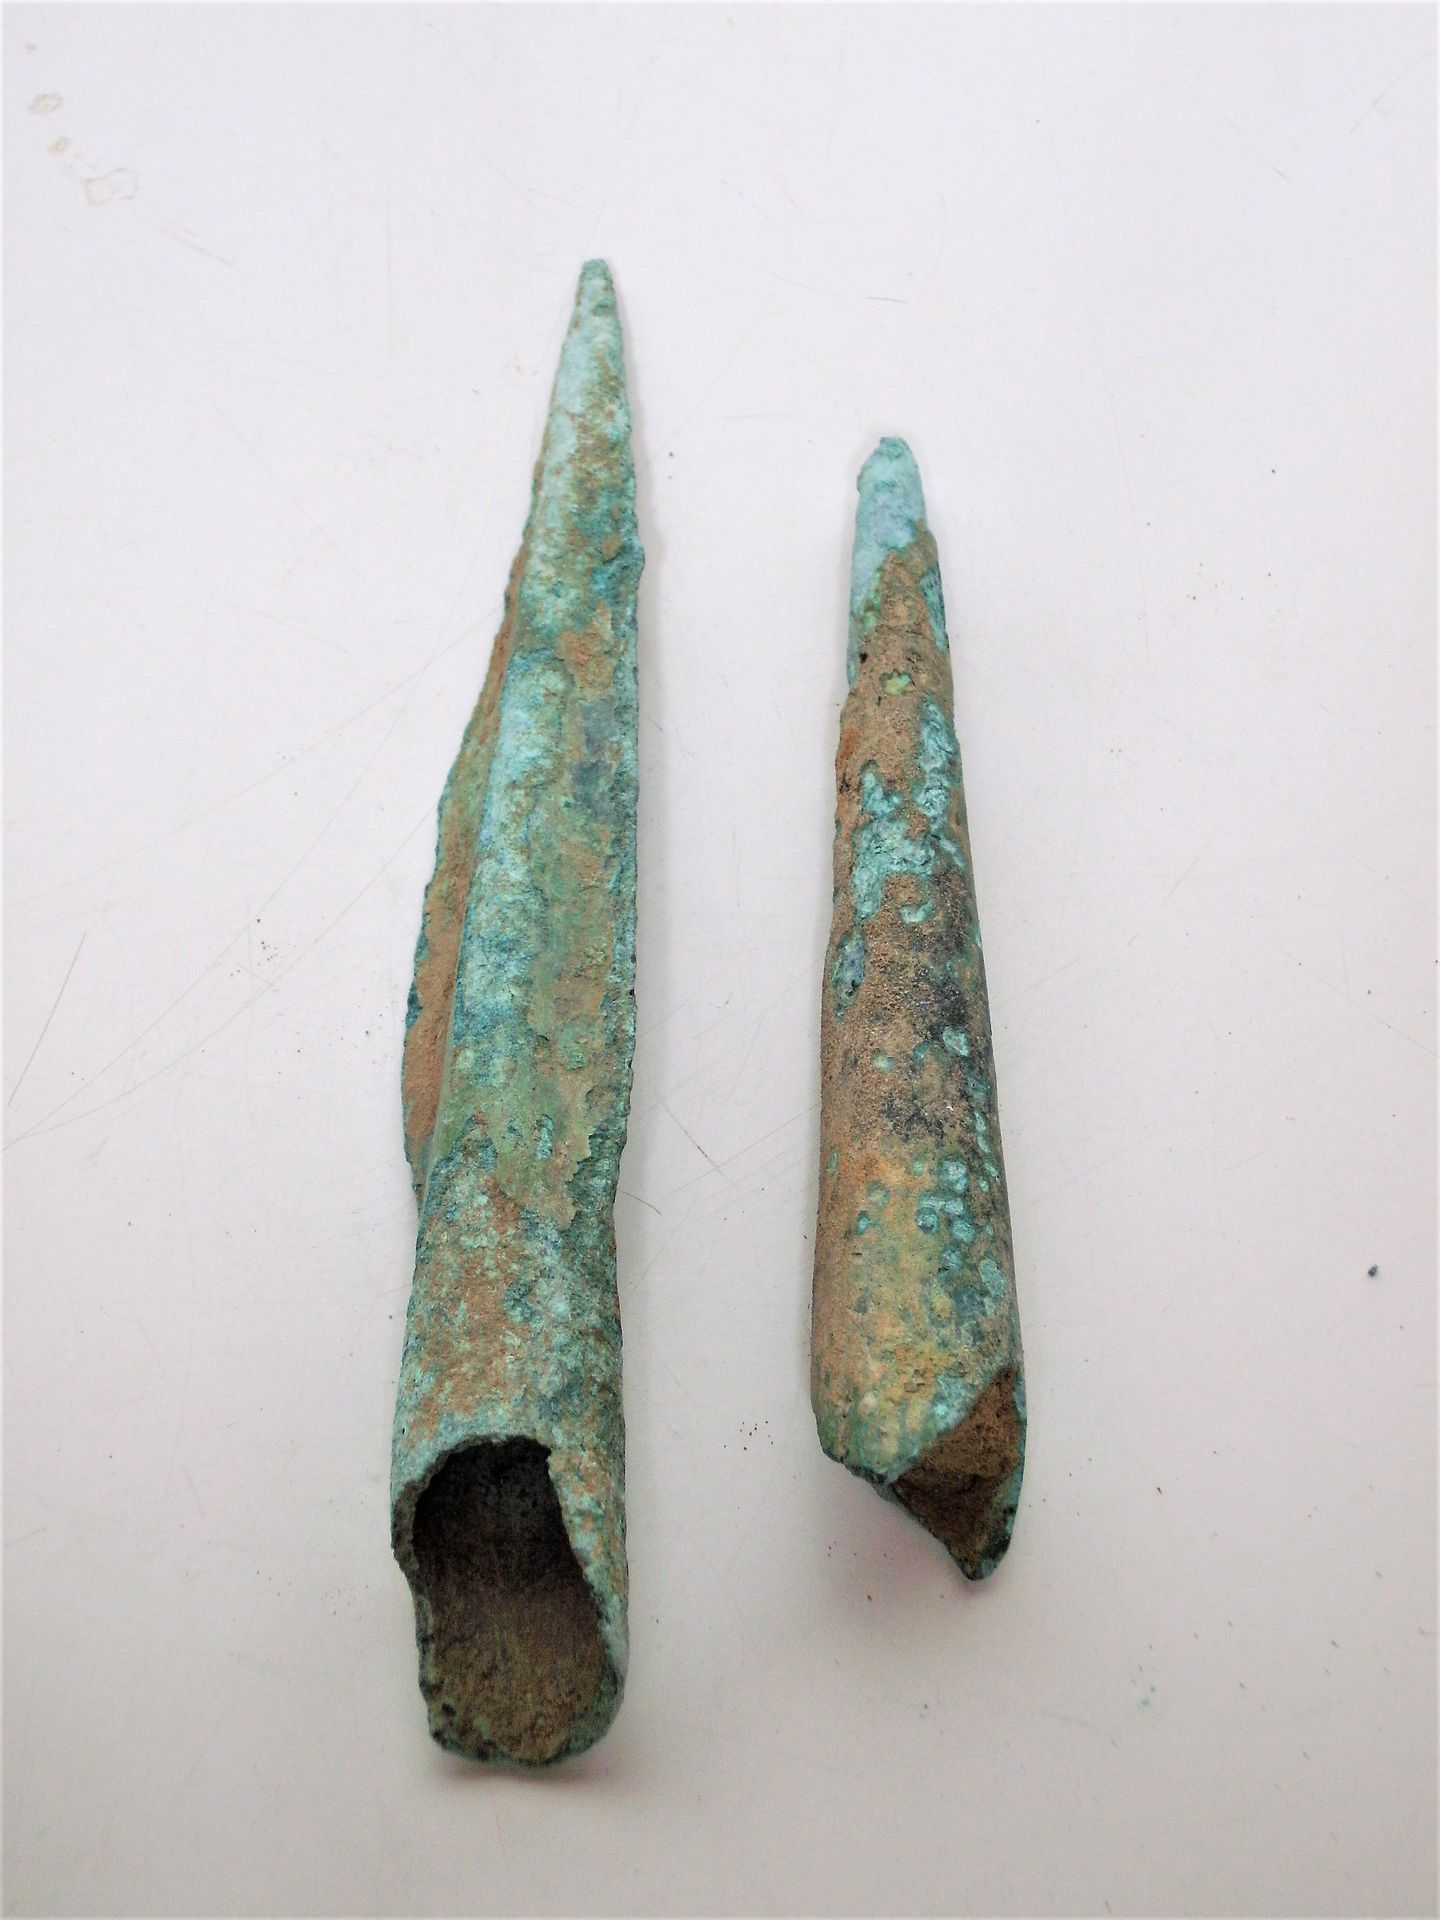 Vietnam Culture Dongson Vietnam

Dong Son Culture

Two bronze spear points with &hellip;